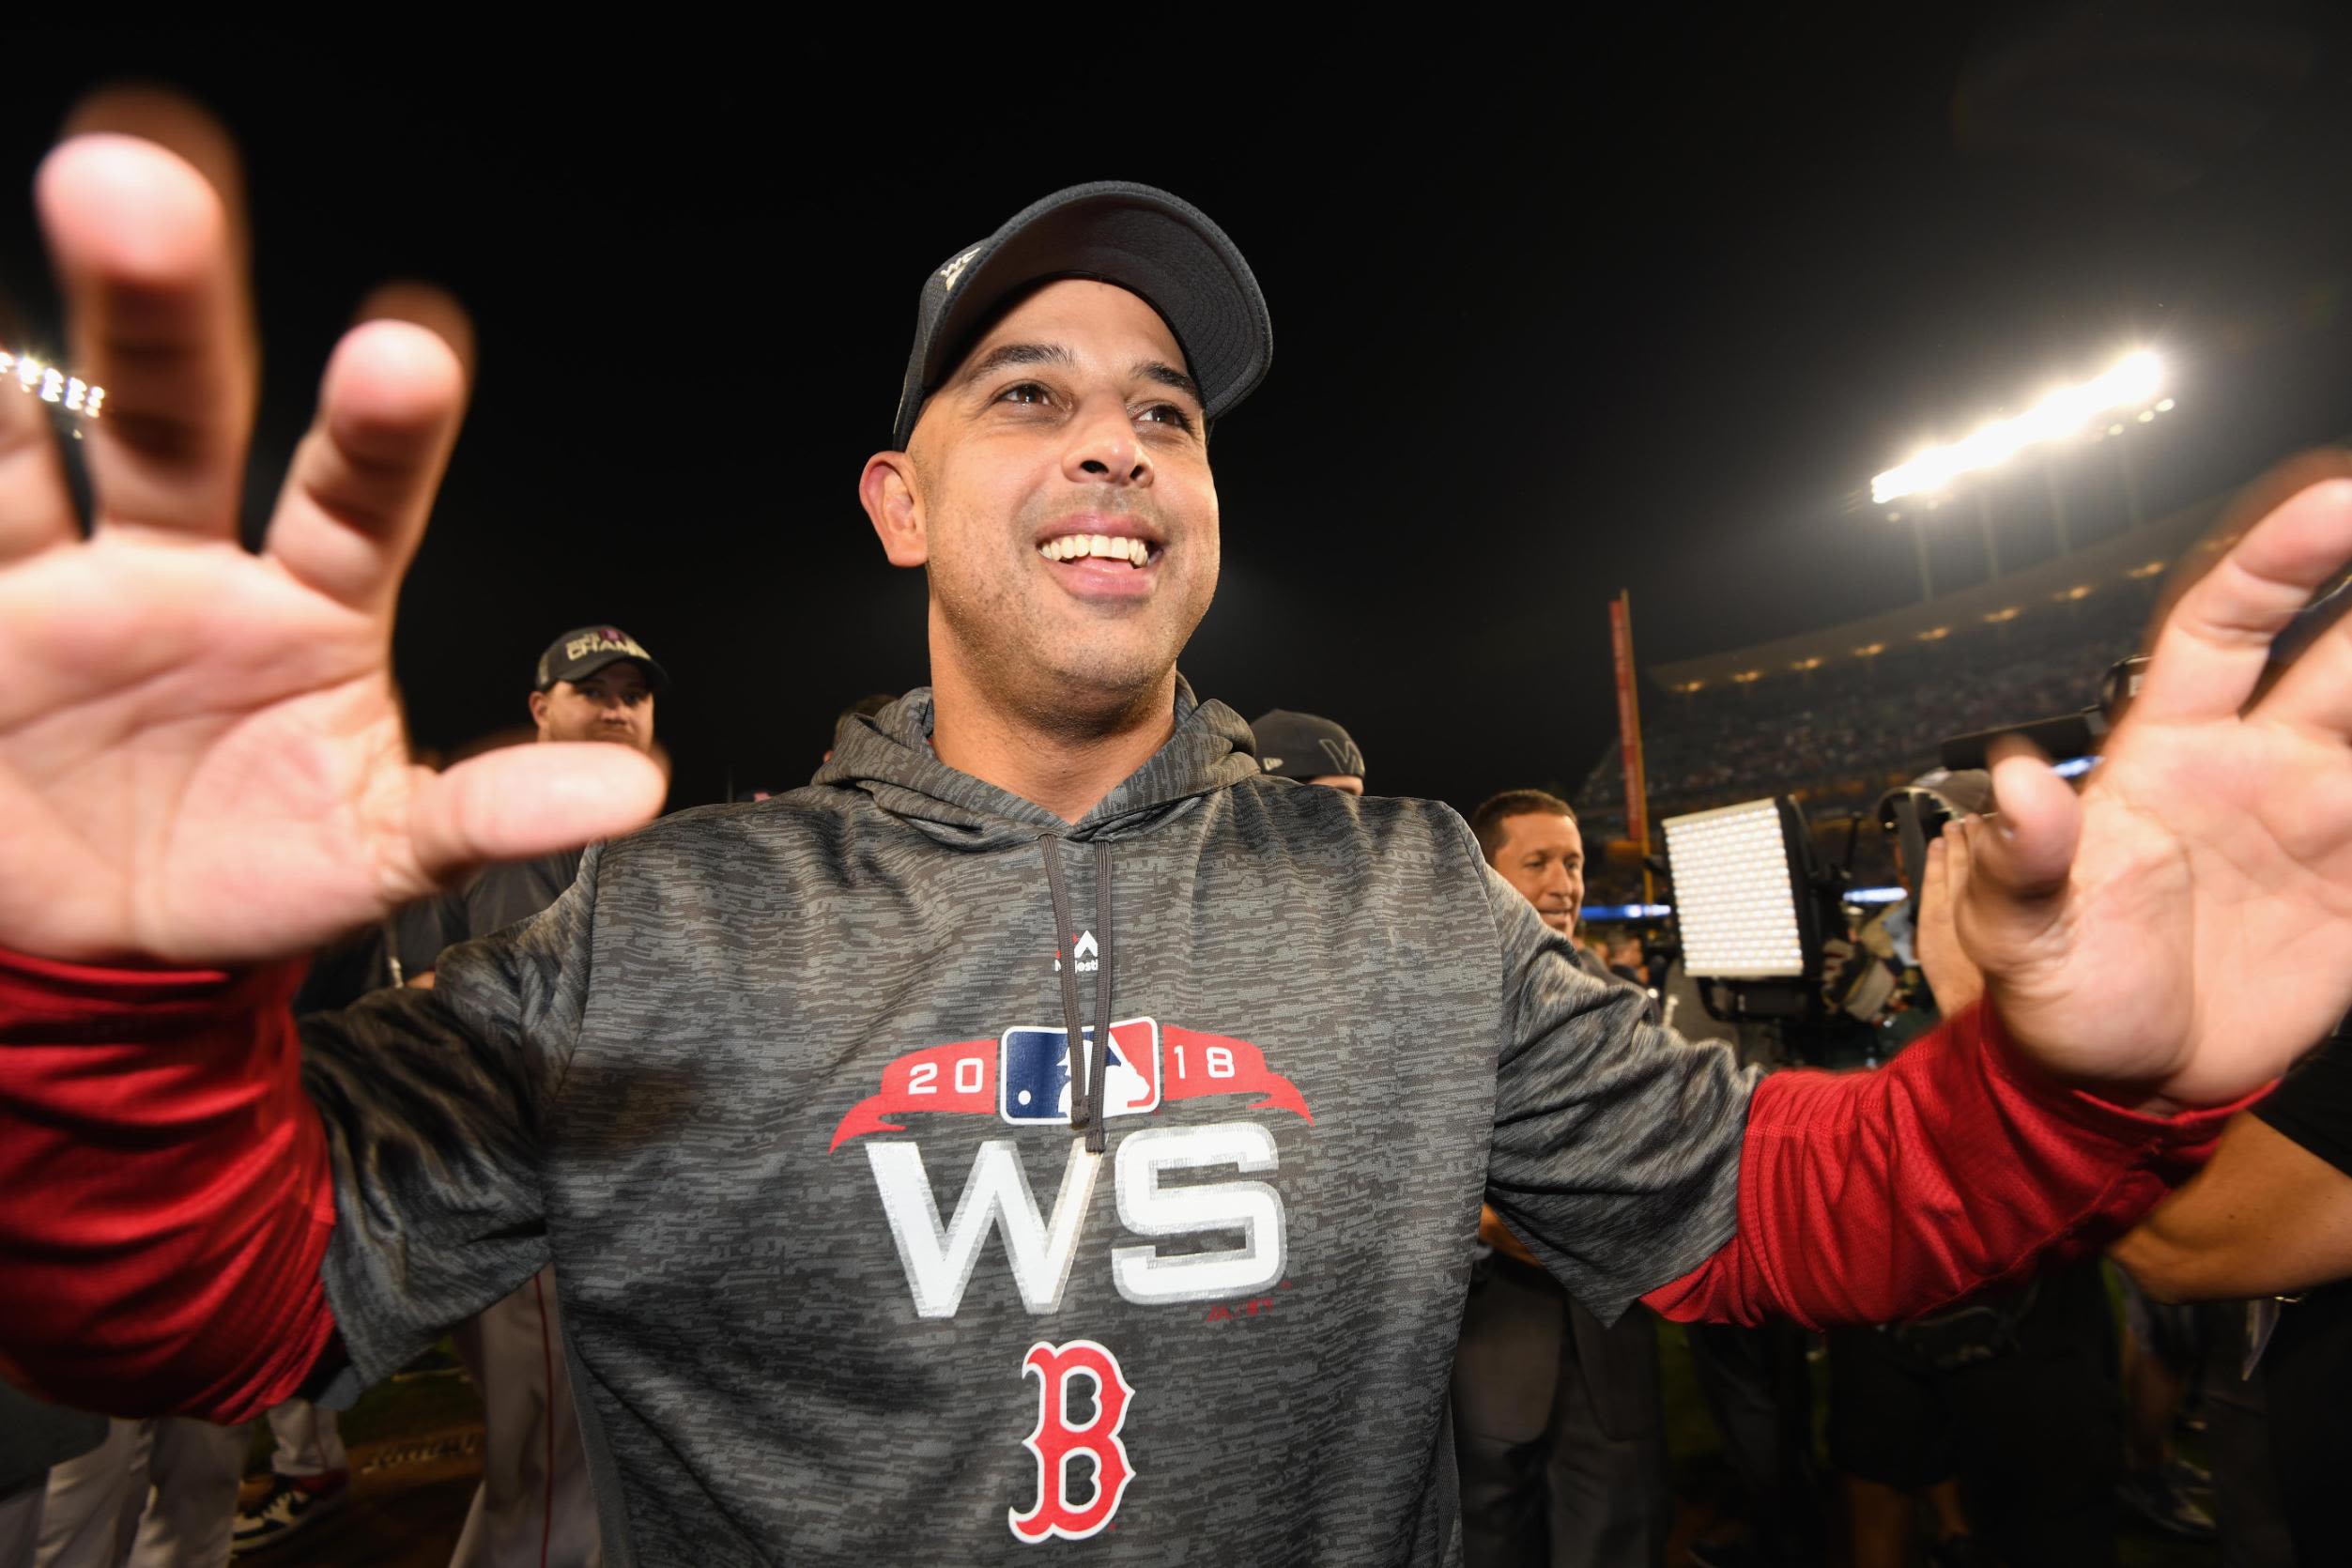 Red Sox's Alex Cora wants more steals in 2023 but says